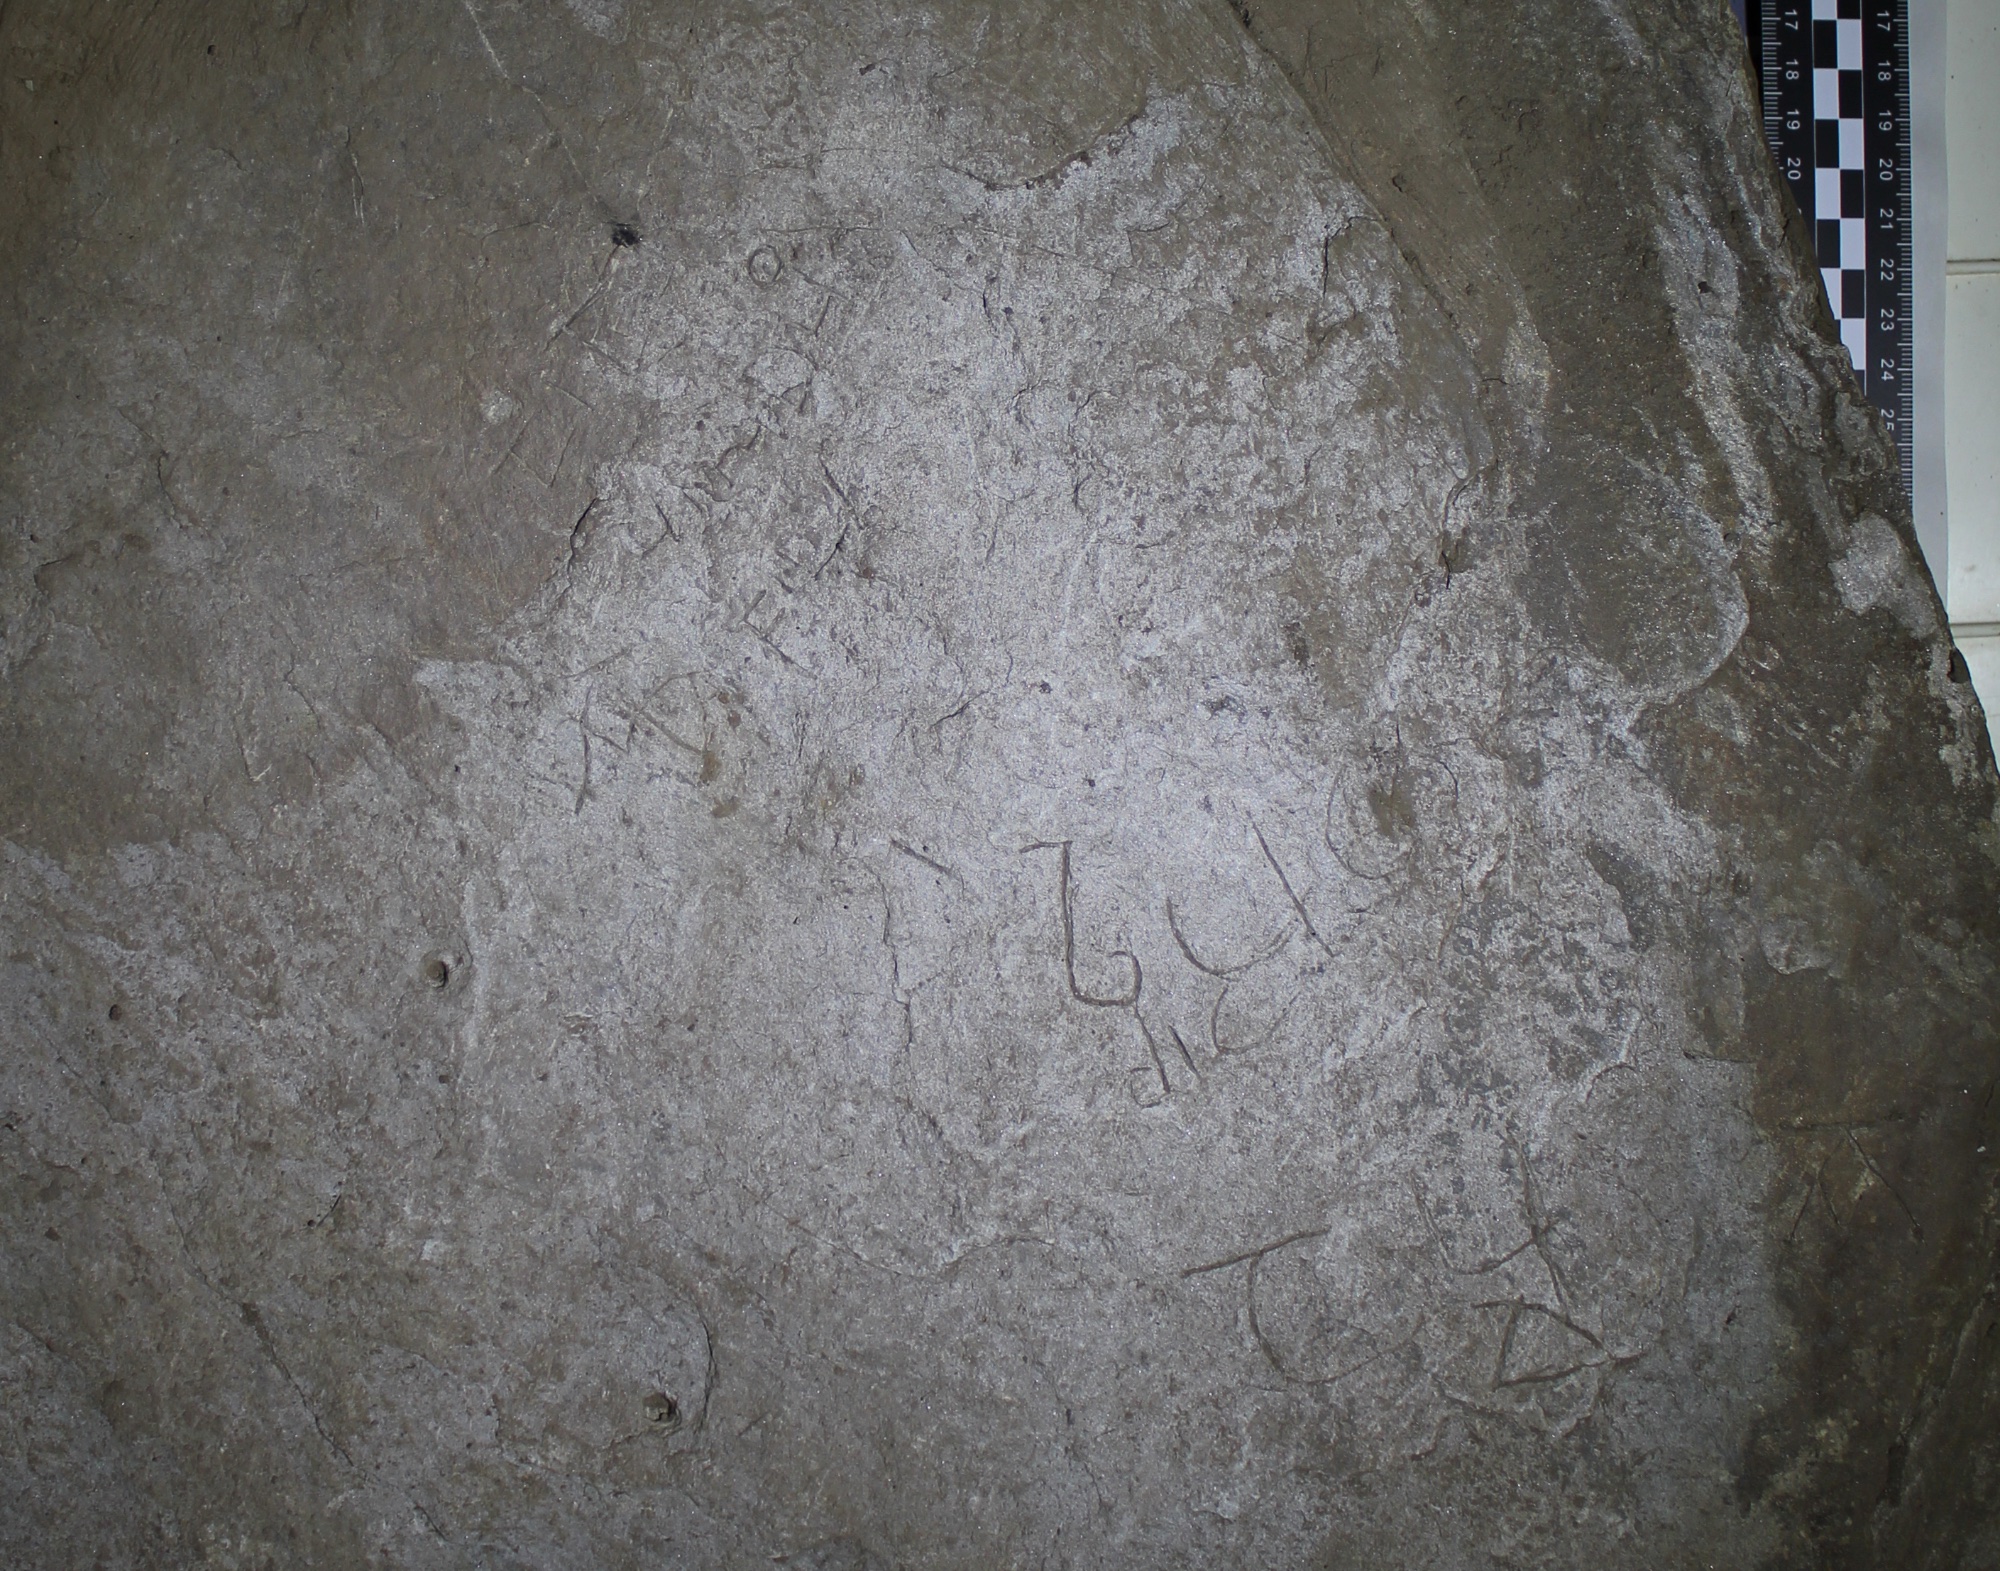 An overhead image of a large lump of slate with a reasonably flat surface. Just about visible are some faint letters incised into the slate, made slightly clearer by the shadows created from the directional light source.